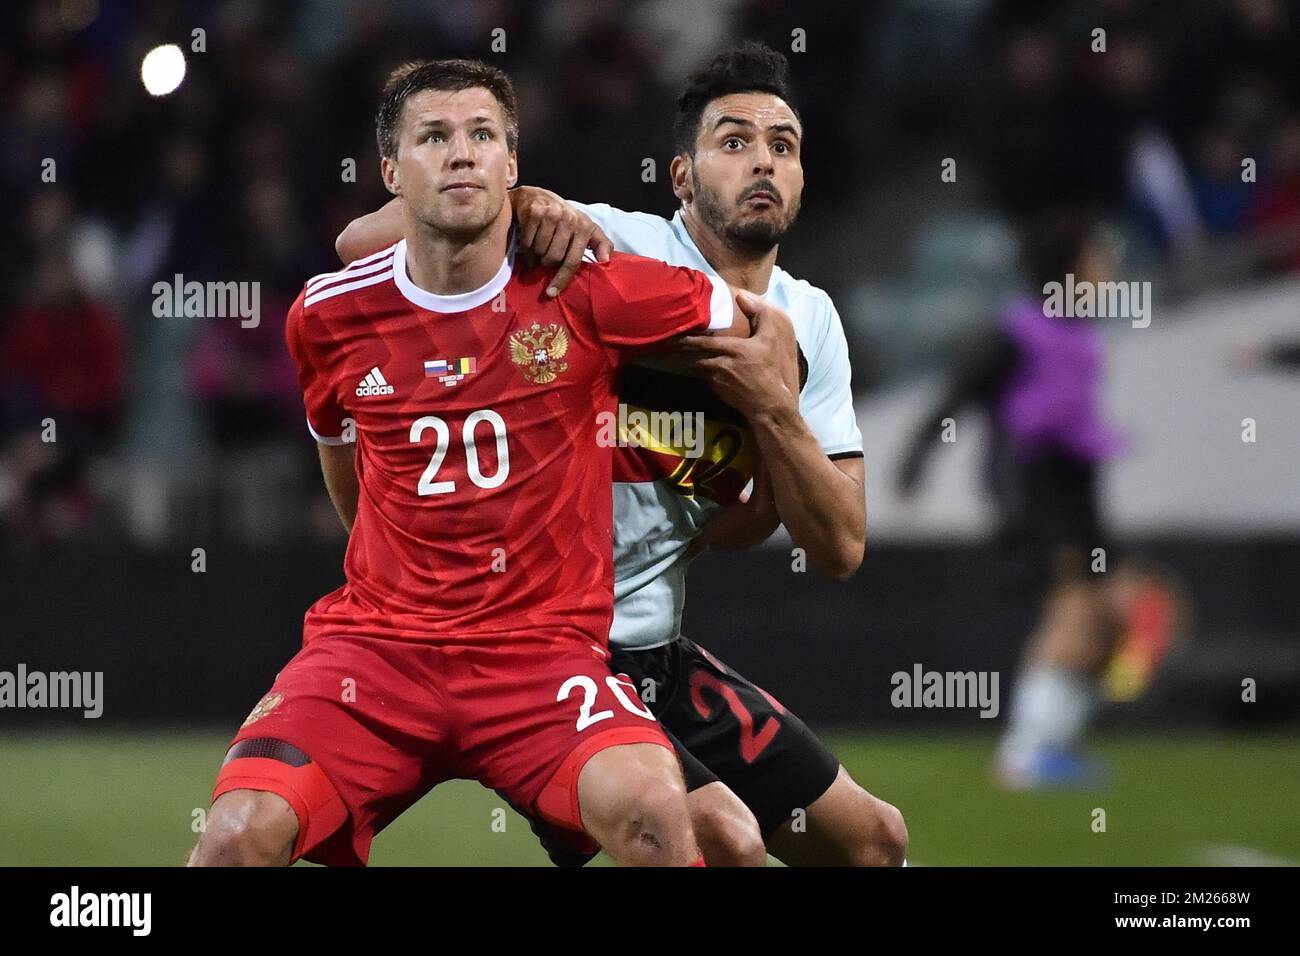 Russia's Maksim Kanunnikov and Belgium's Nacer Chadli fight for the ball during a friendly game between Belgium's Red Devils and Russia, on Tuesday 28 March 2017, in Adler, Russia. BELGA PHOTO DIRK WAEM Stock Photo